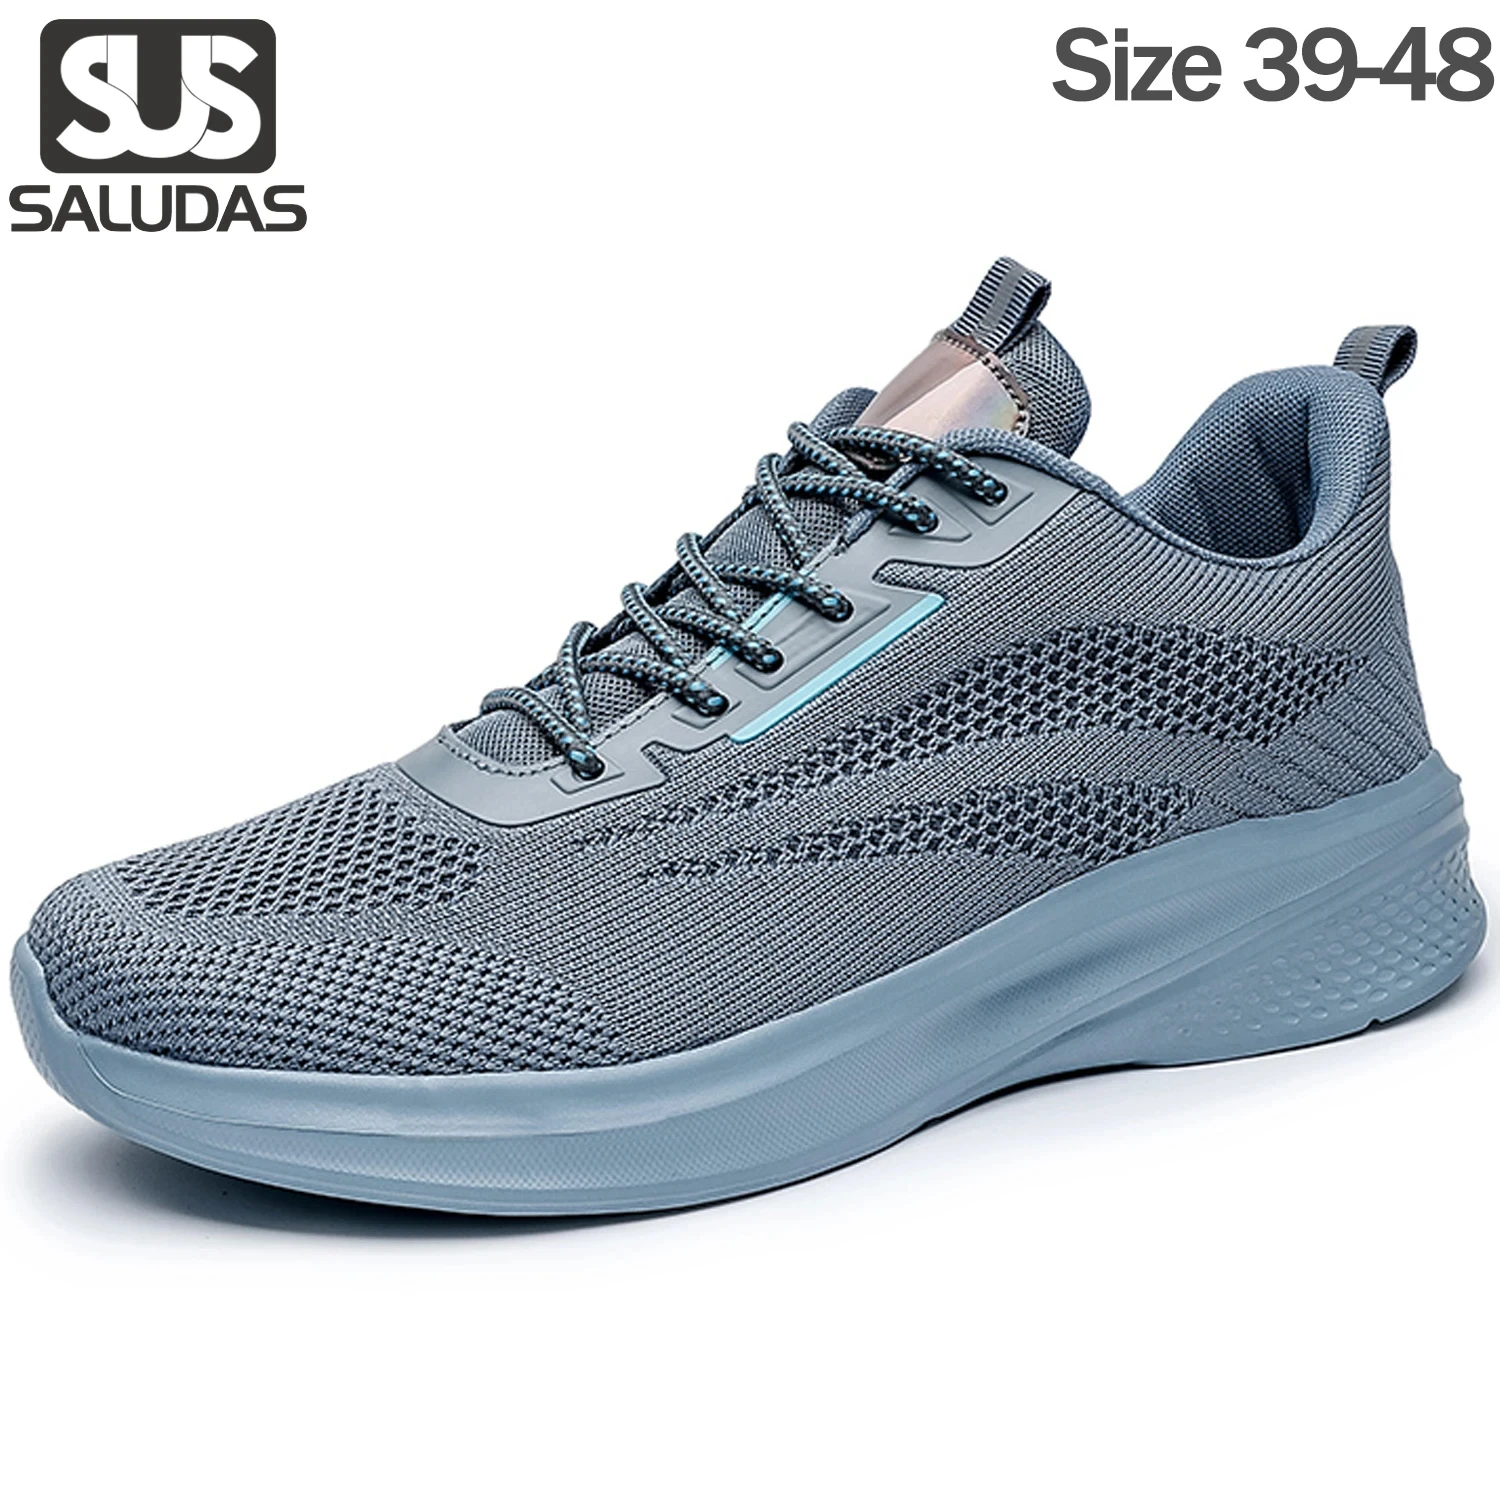 

SALUDAS Men Running Shoes Outdoor Tennis Shoes Workout Walking Gym Athletic Shoes Eva Sole Breathable Comfor Non Slip Sneakers